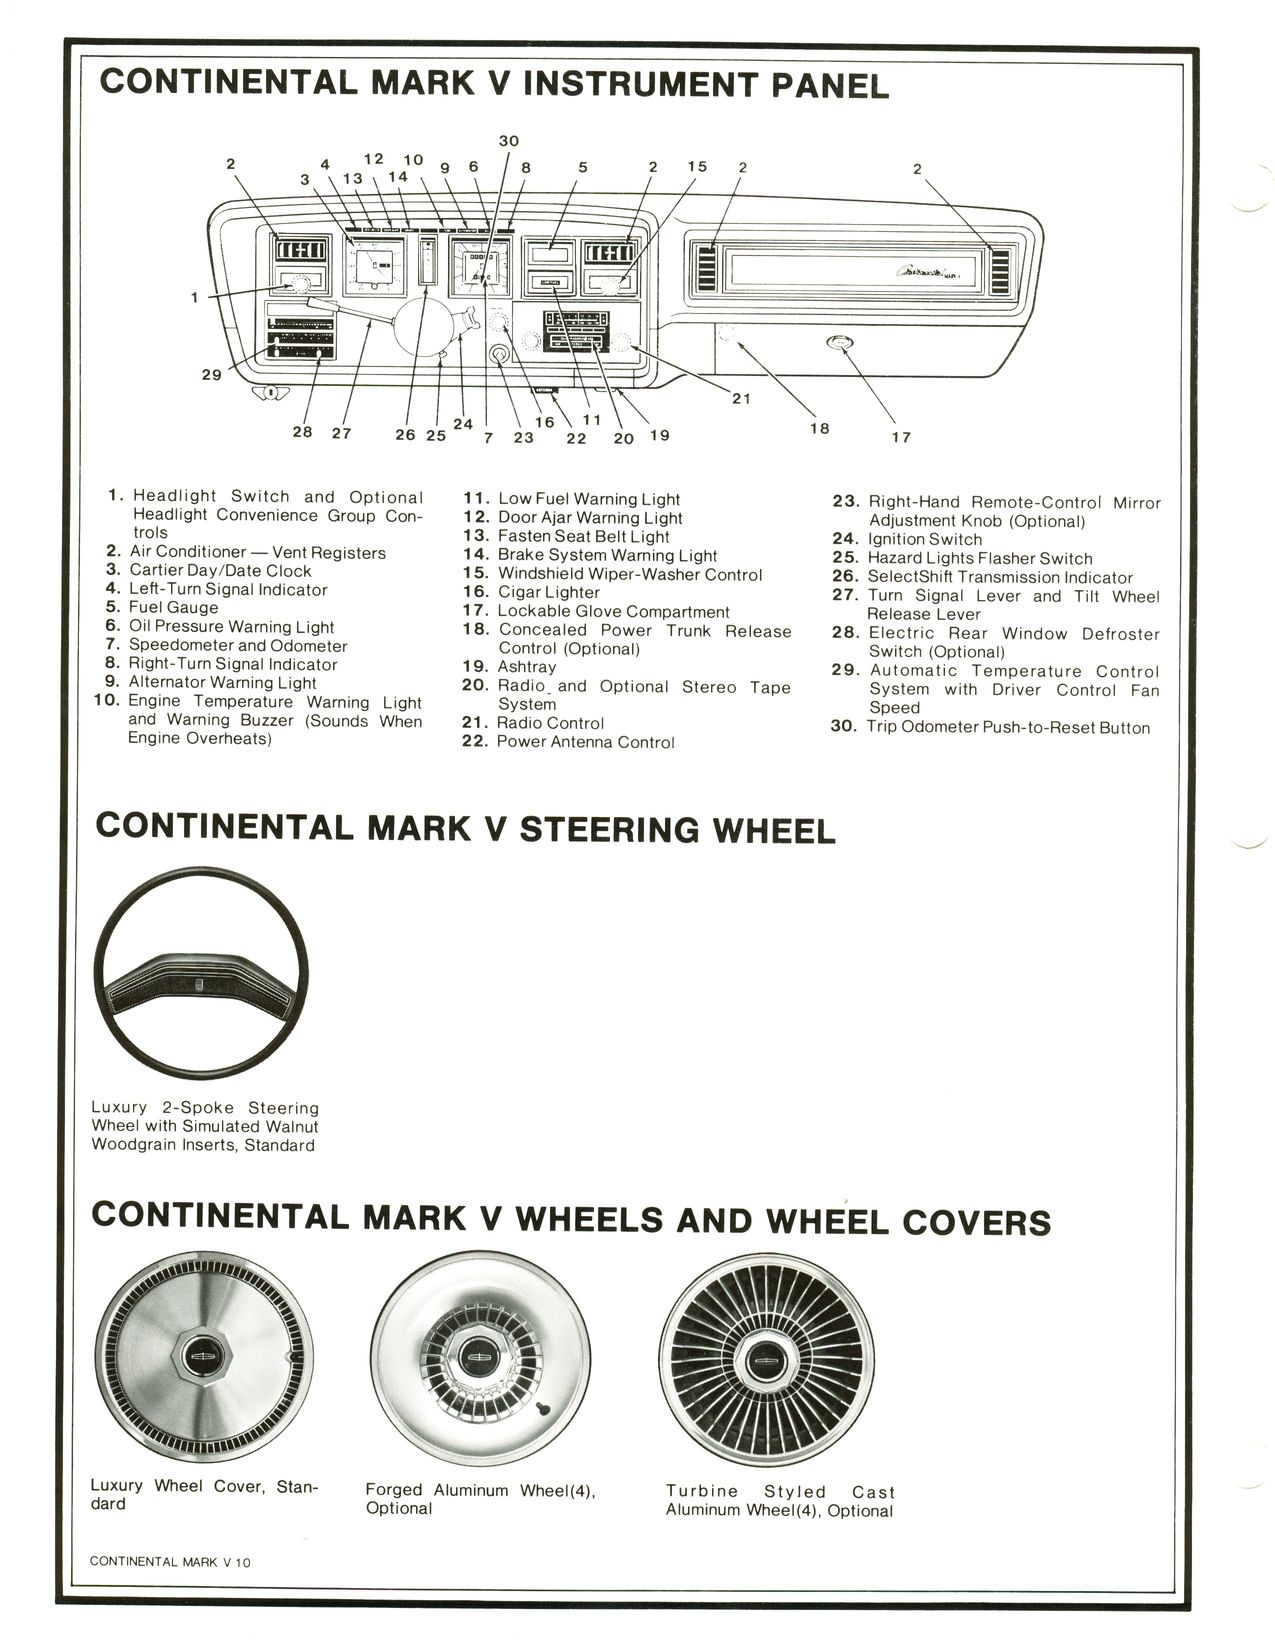 1977_Continental_Product_Facts_Book-1-10